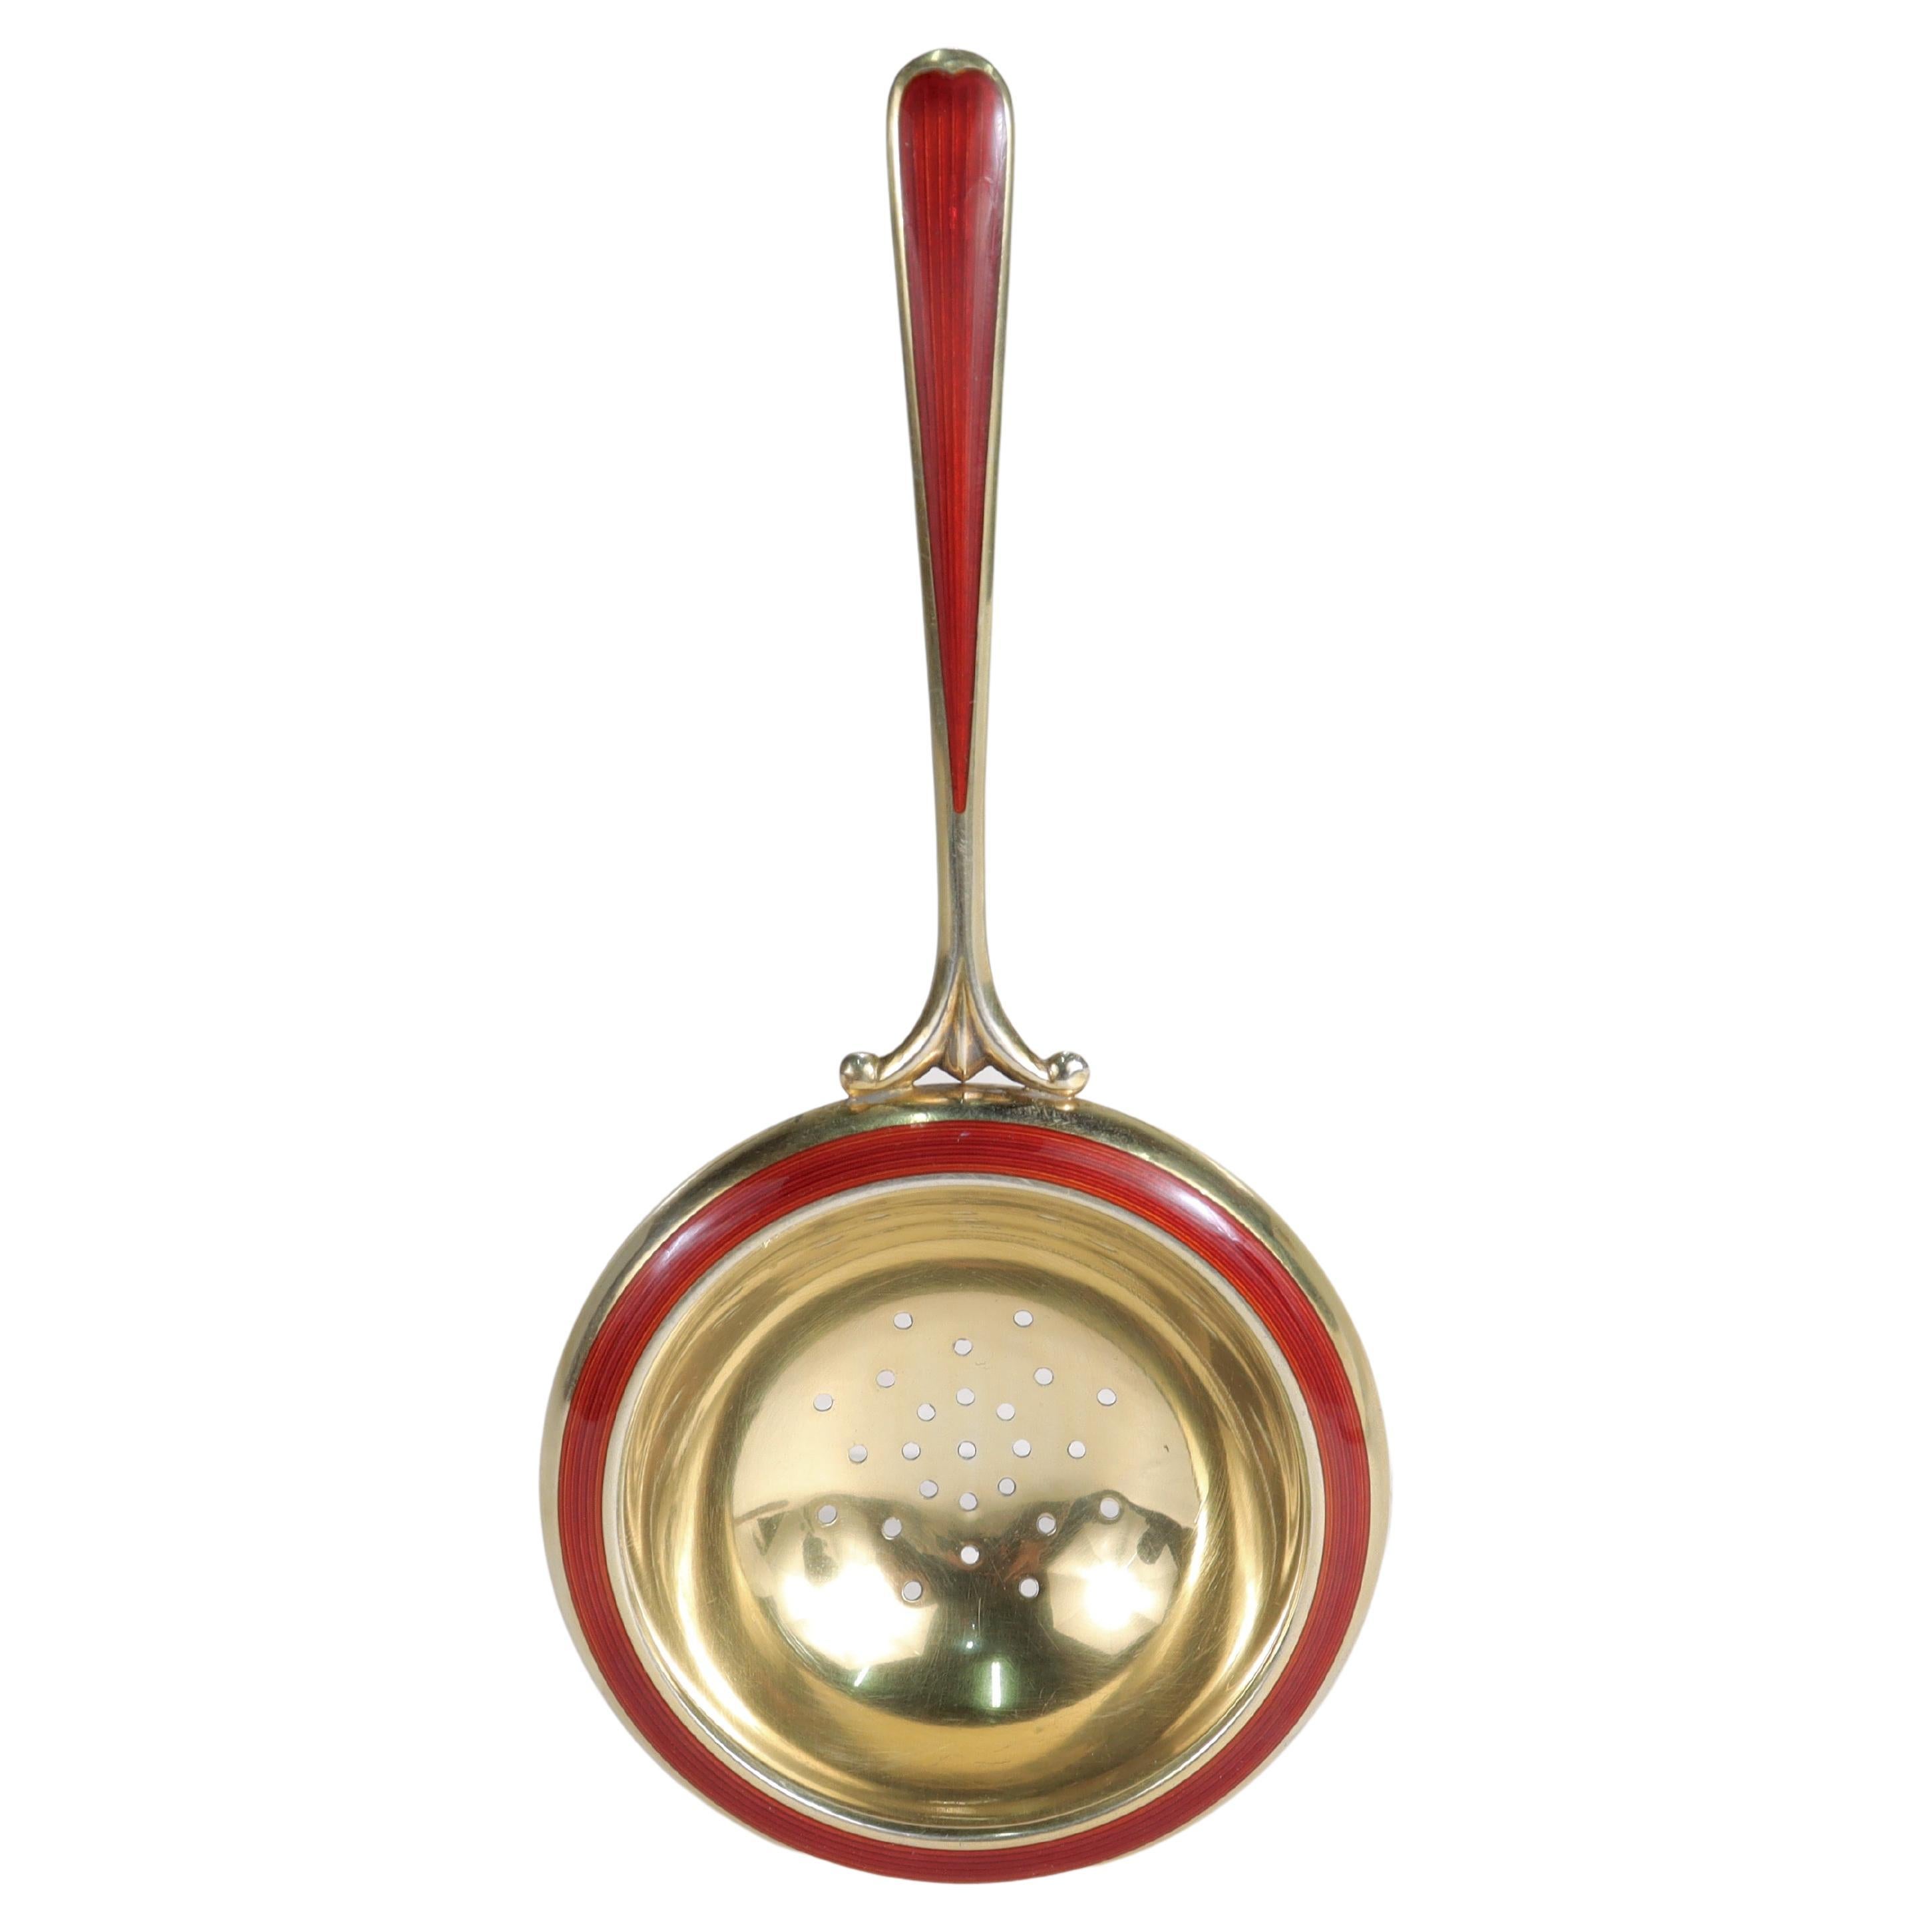 A fine antique Art Deco period tea strainer.

By the Scandinavian silversmiths N.M. Thune (Oslo, Norway).

In gilt sterling silver with red guilloche enamel decoration to the bowl and handle.

Fully hallmarked to the reverse.

Simply a wonderful tea